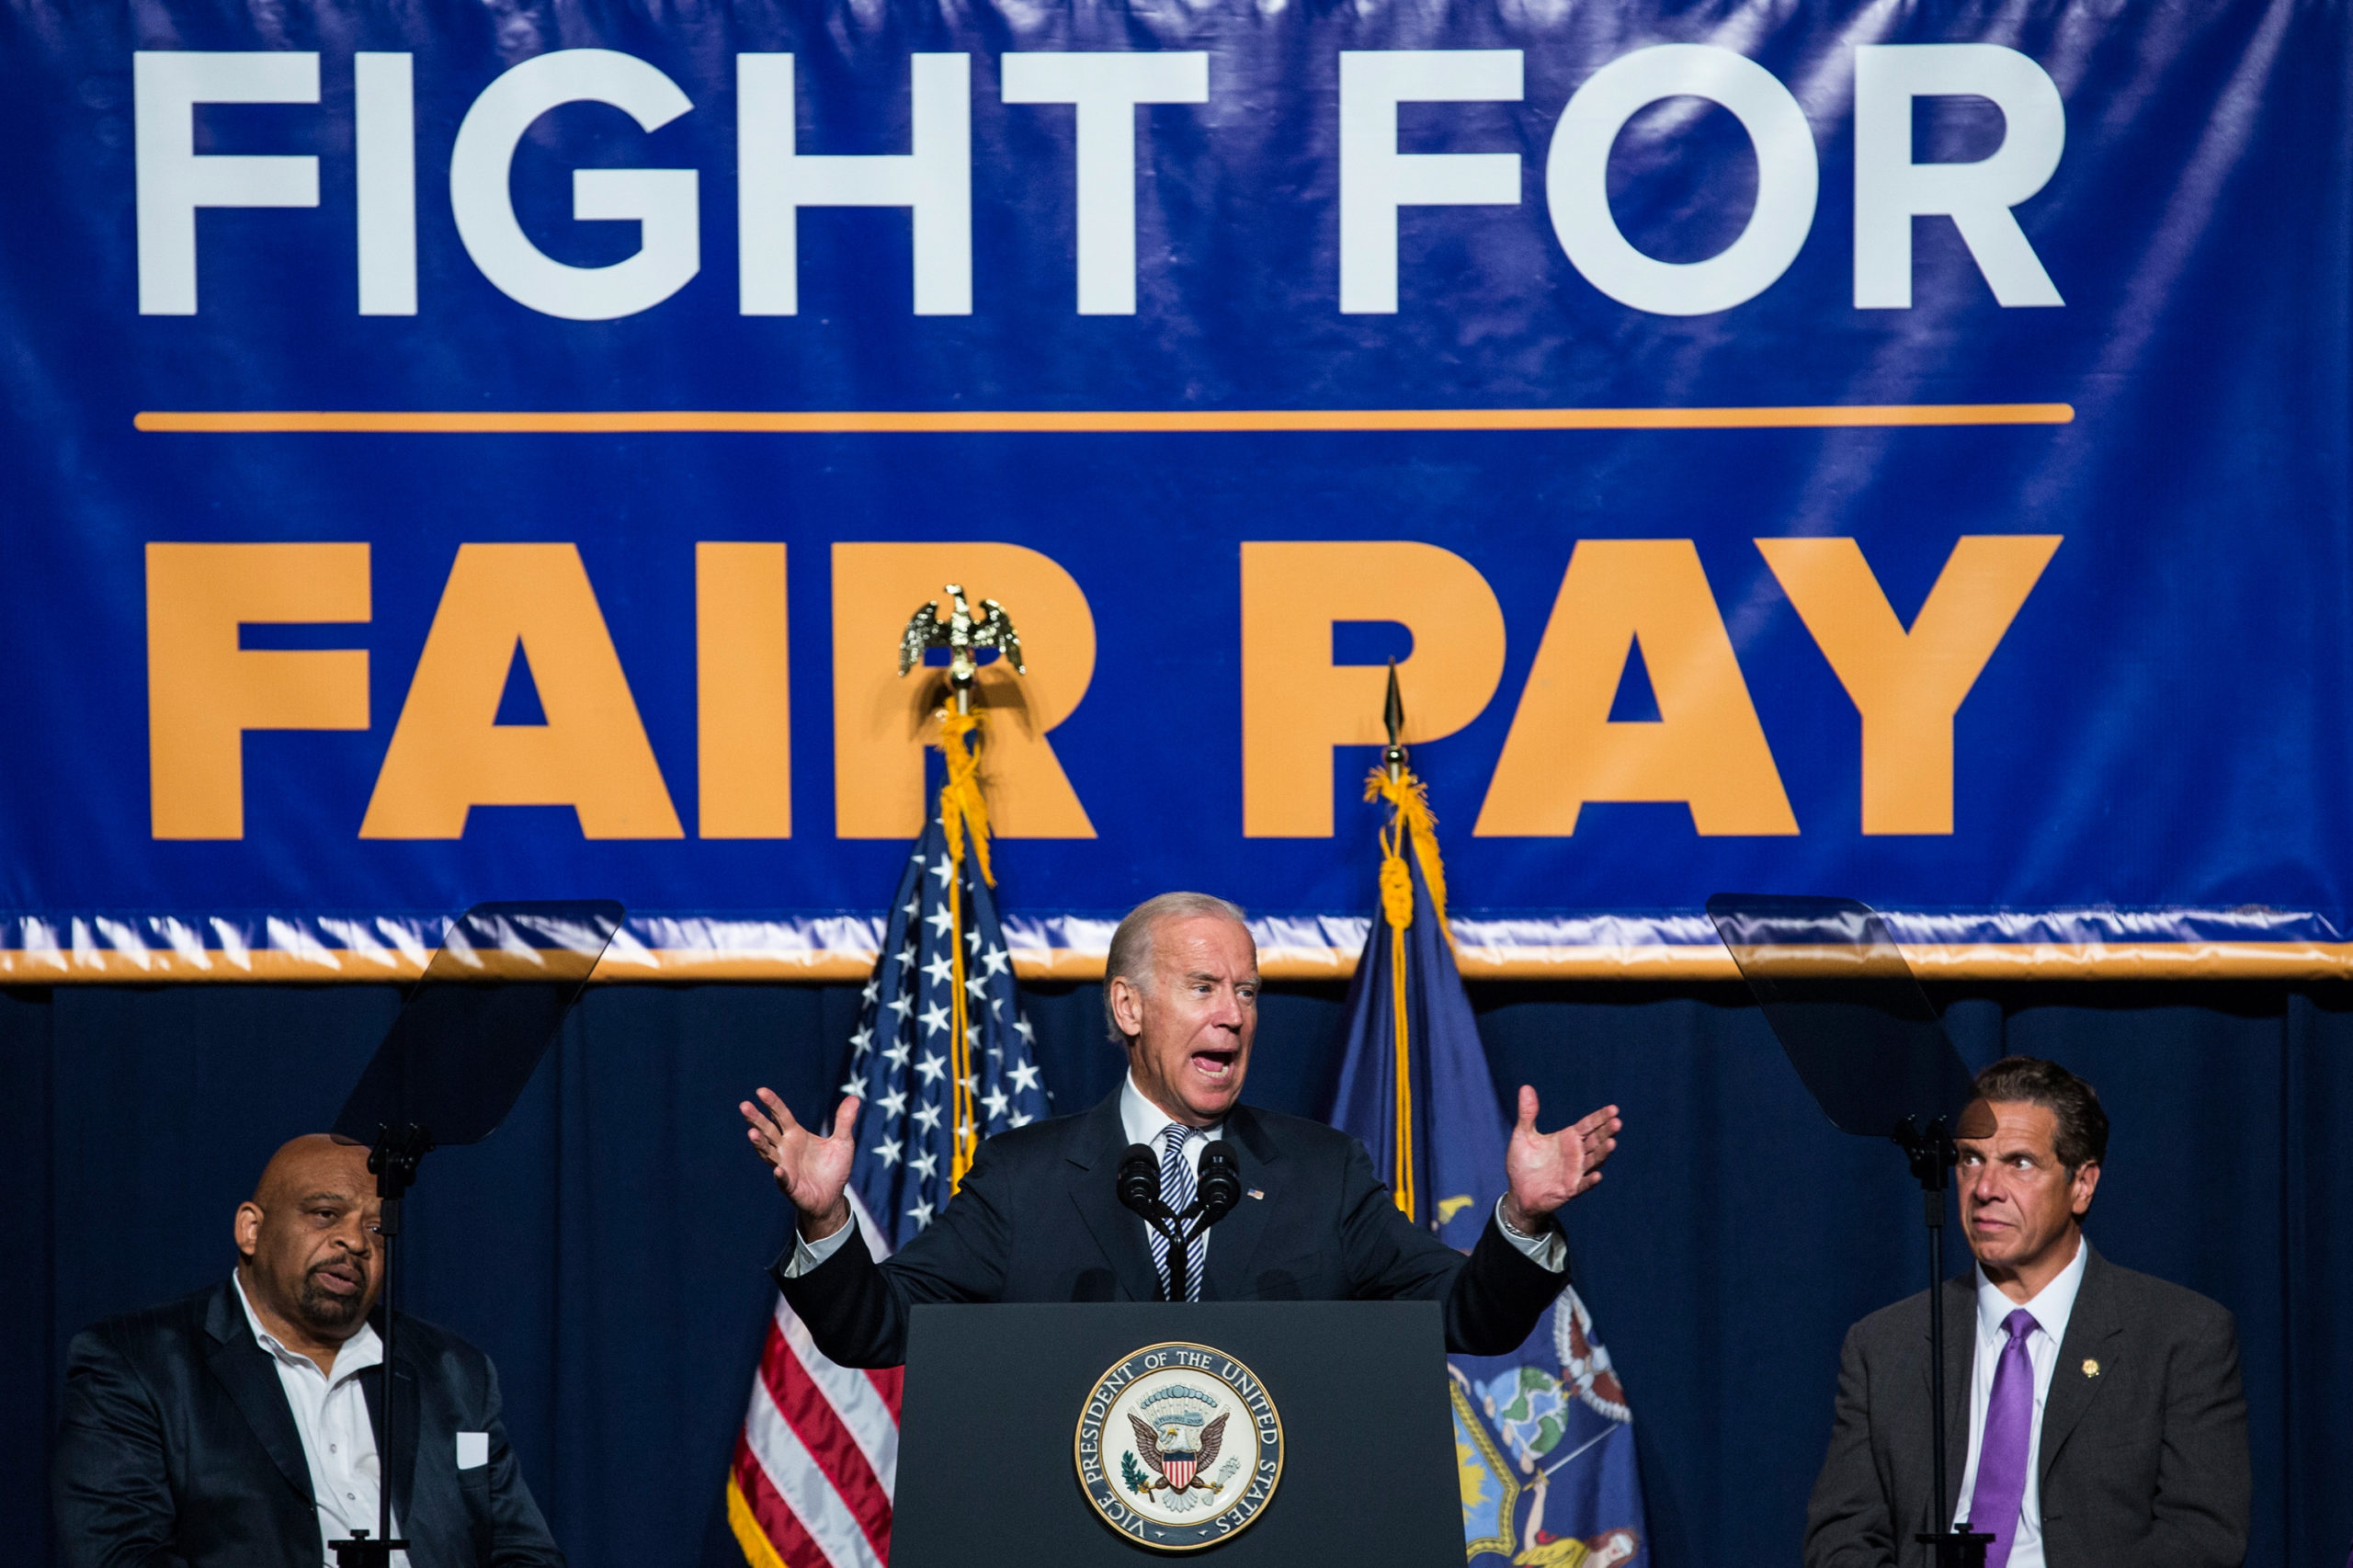 NEW YORK, NY - SEPTEMBER 10: Then-U.S. Vice President Joe Biden (C) speaks in support of raising the minimum wage for the state of New York to $15 per hour on September 10, 2015 in New York City. Biden said he would like to see the federal minimum wage risen to $12 per hour. (Photo by Andrew Burton/Getty Images)